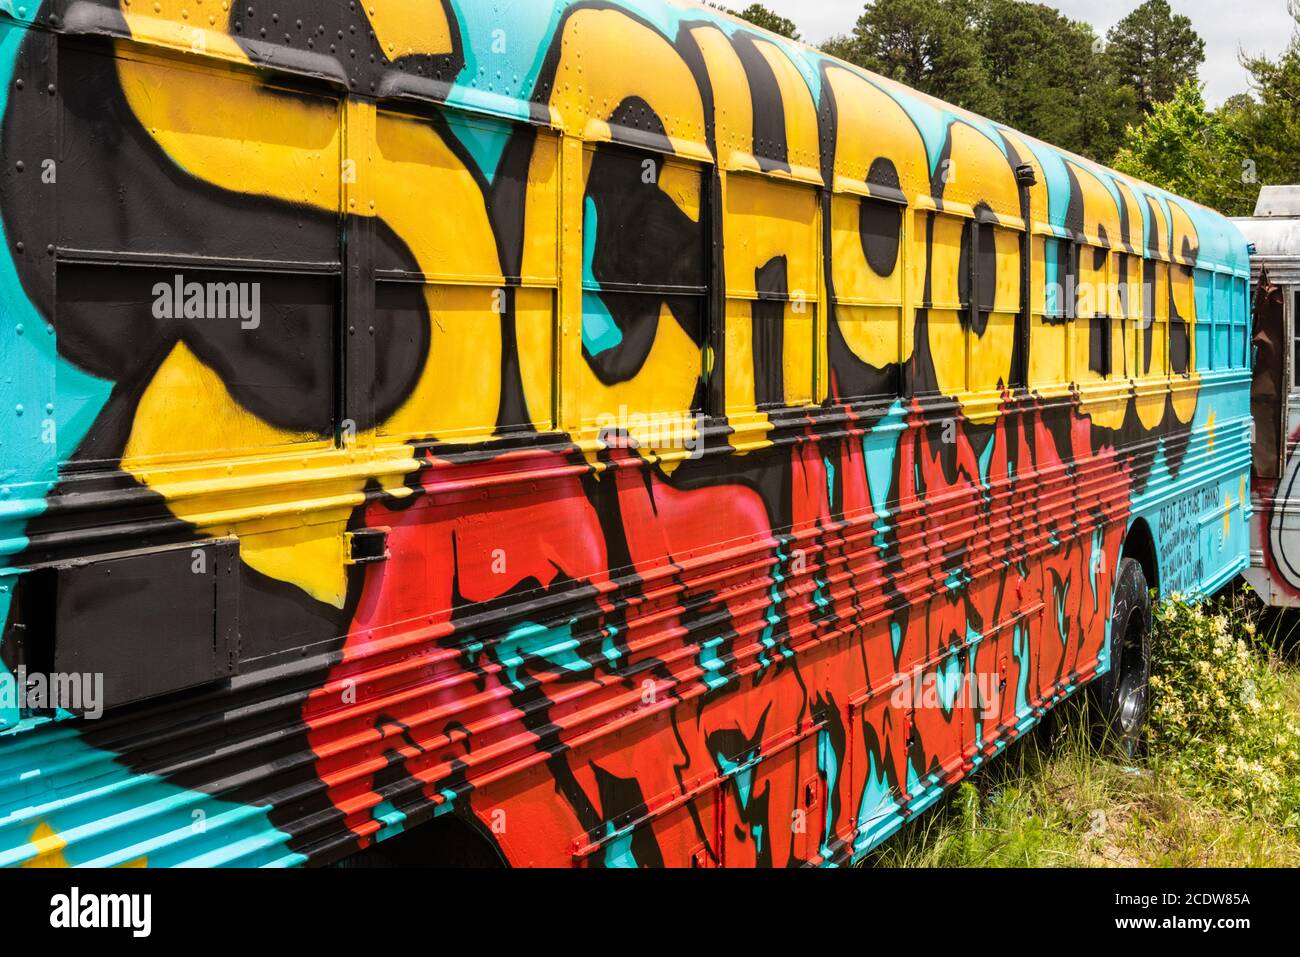 Awesome School Bus, credited to Google maps., PatrickRich